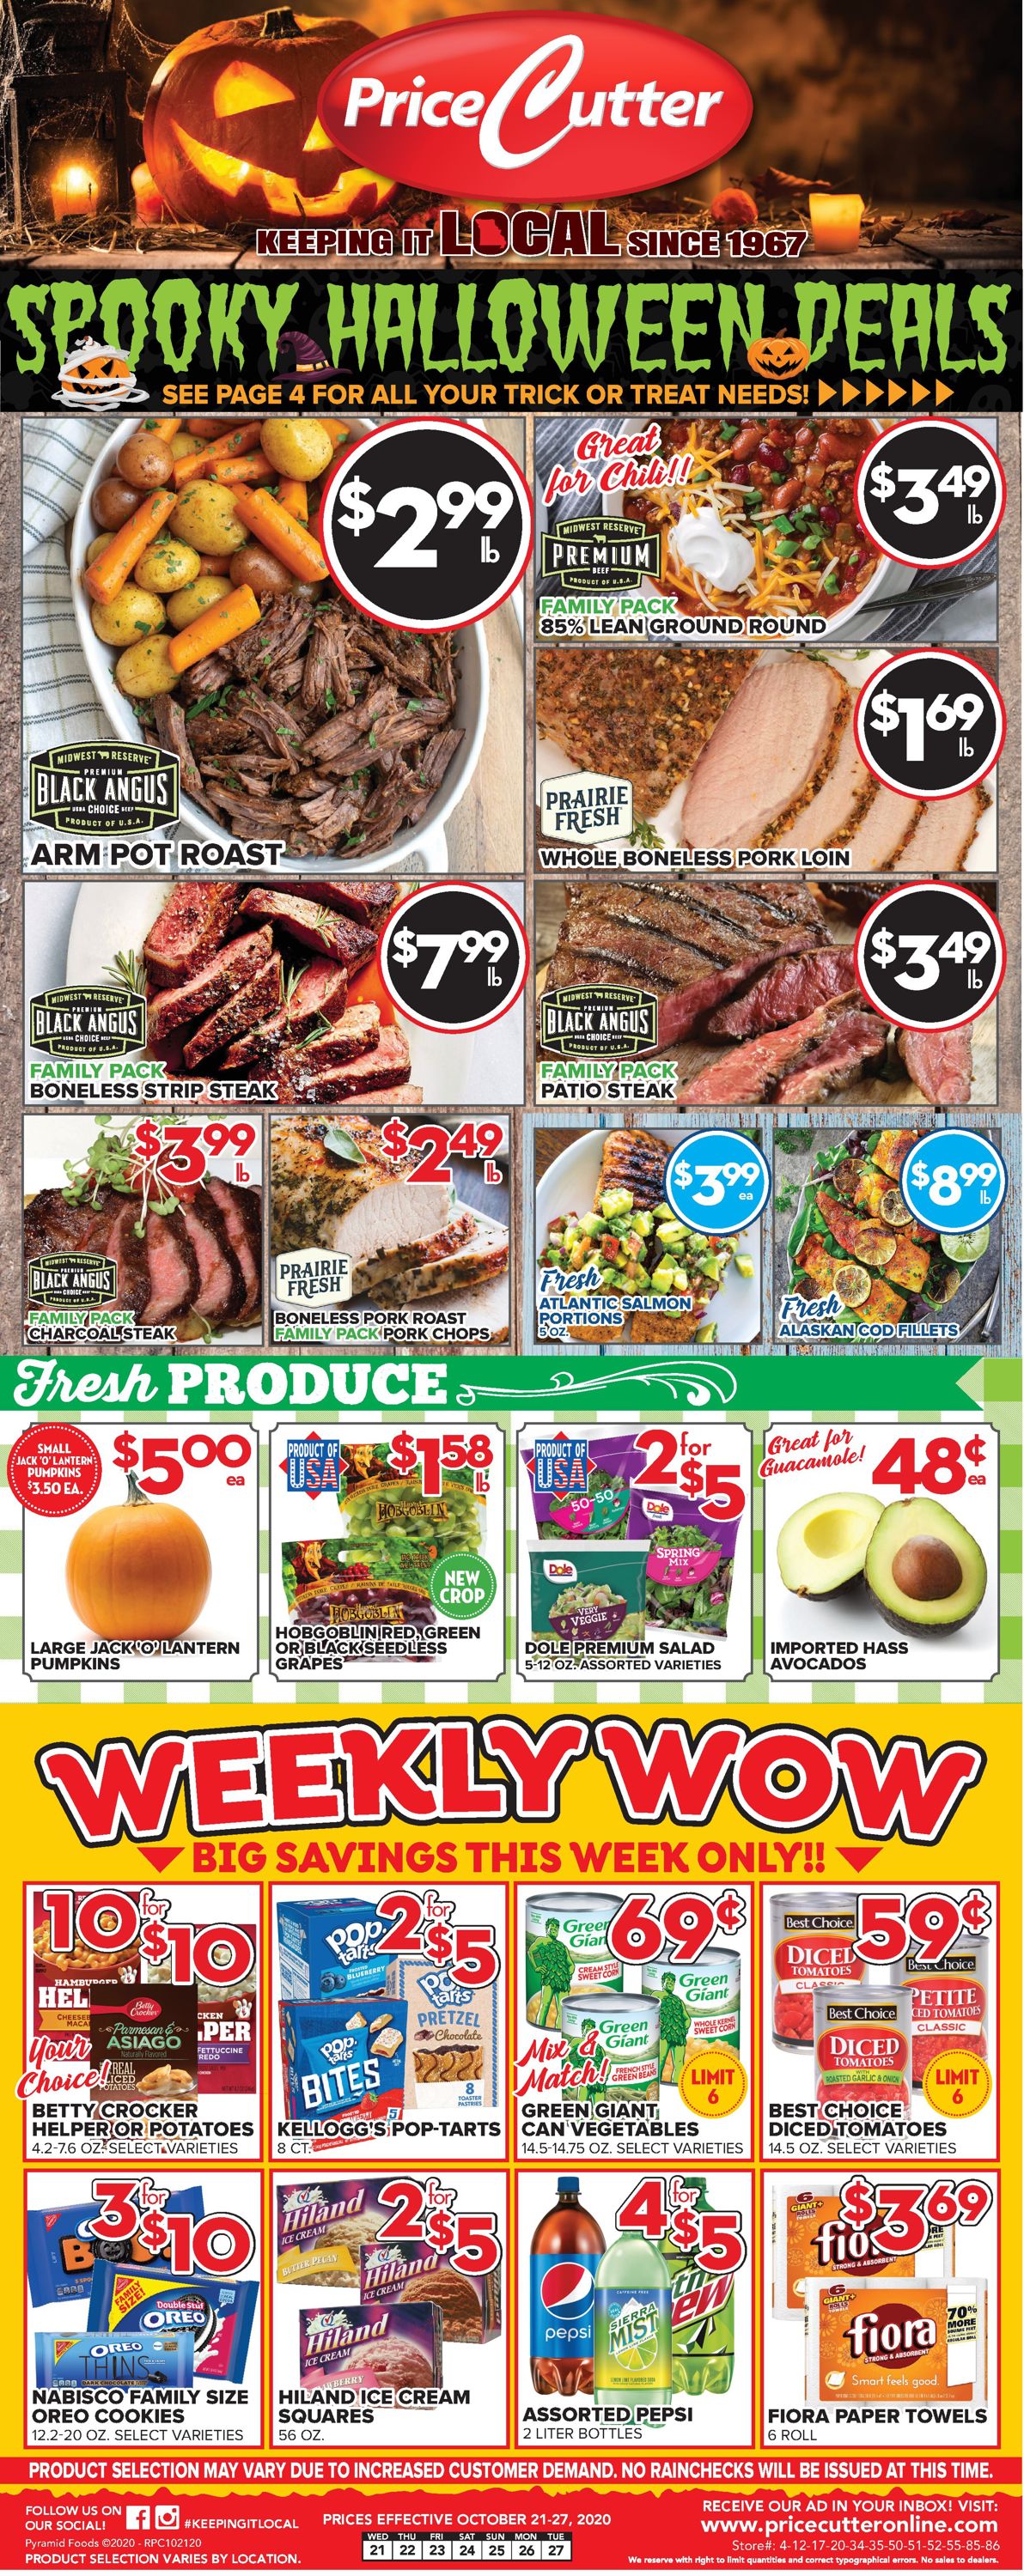 Price Cutter Weekly Ad Circular - valid 10/21-10/27/2020